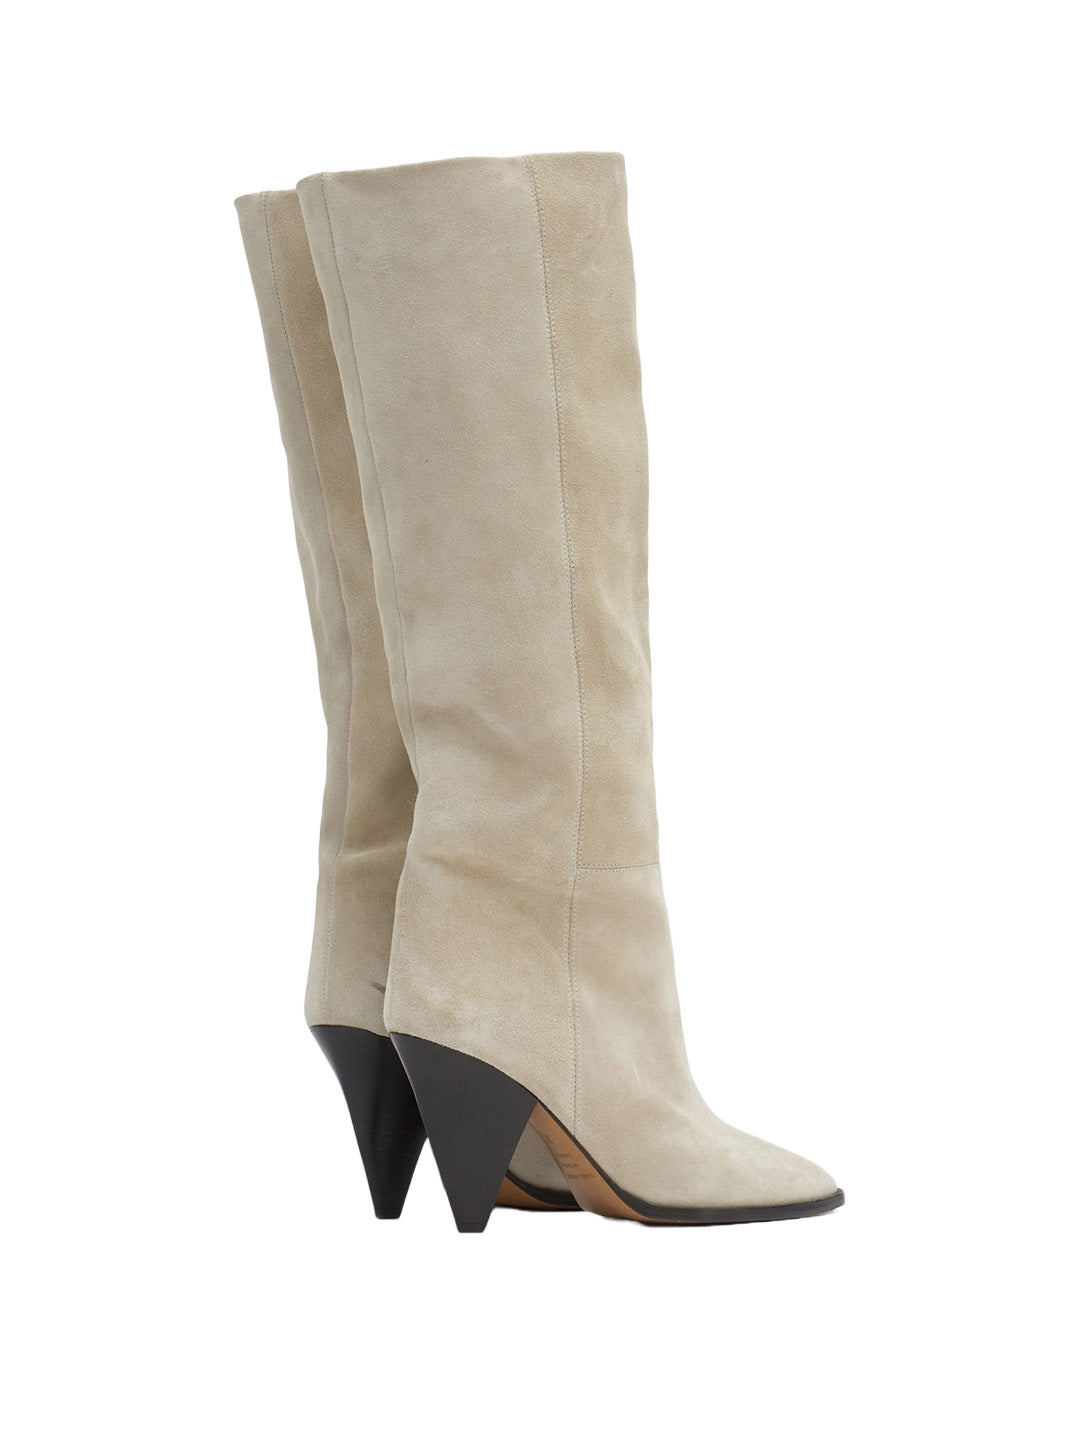 Ririo Suede Leather Boots in Beige